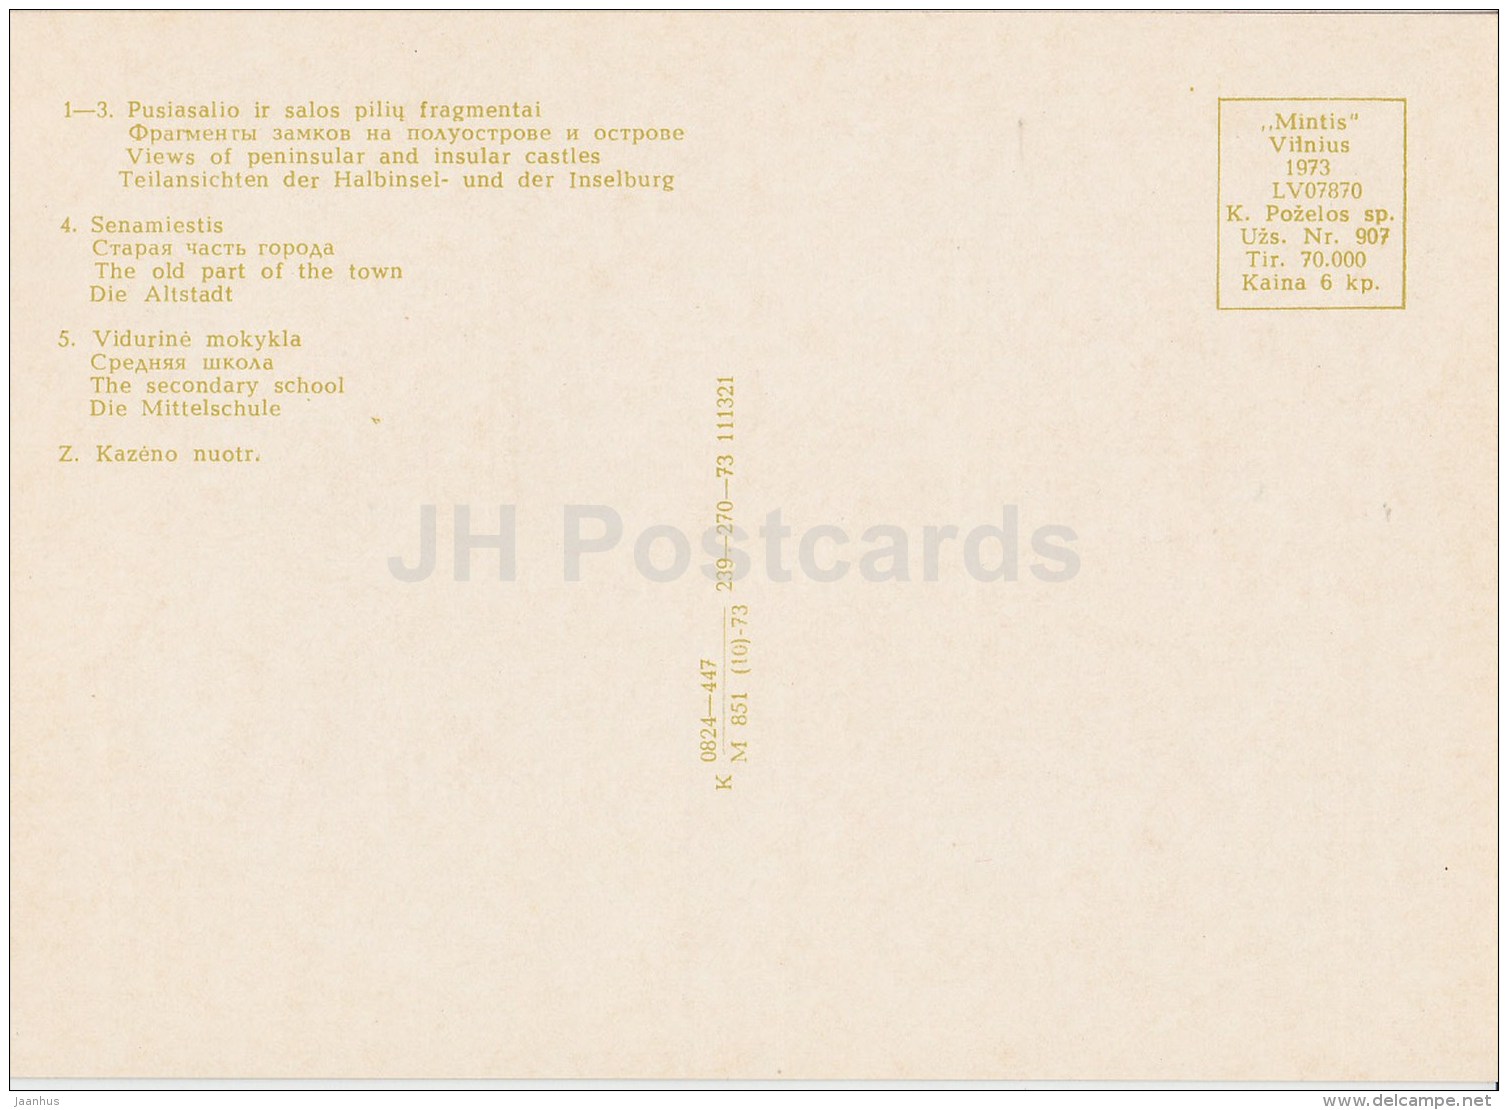 Vies Of Peninsular And Insular Castles - Old Part Of The Town - Secondary School - Trakai 1973 - Lithuania USSR - Unused - Lituanie